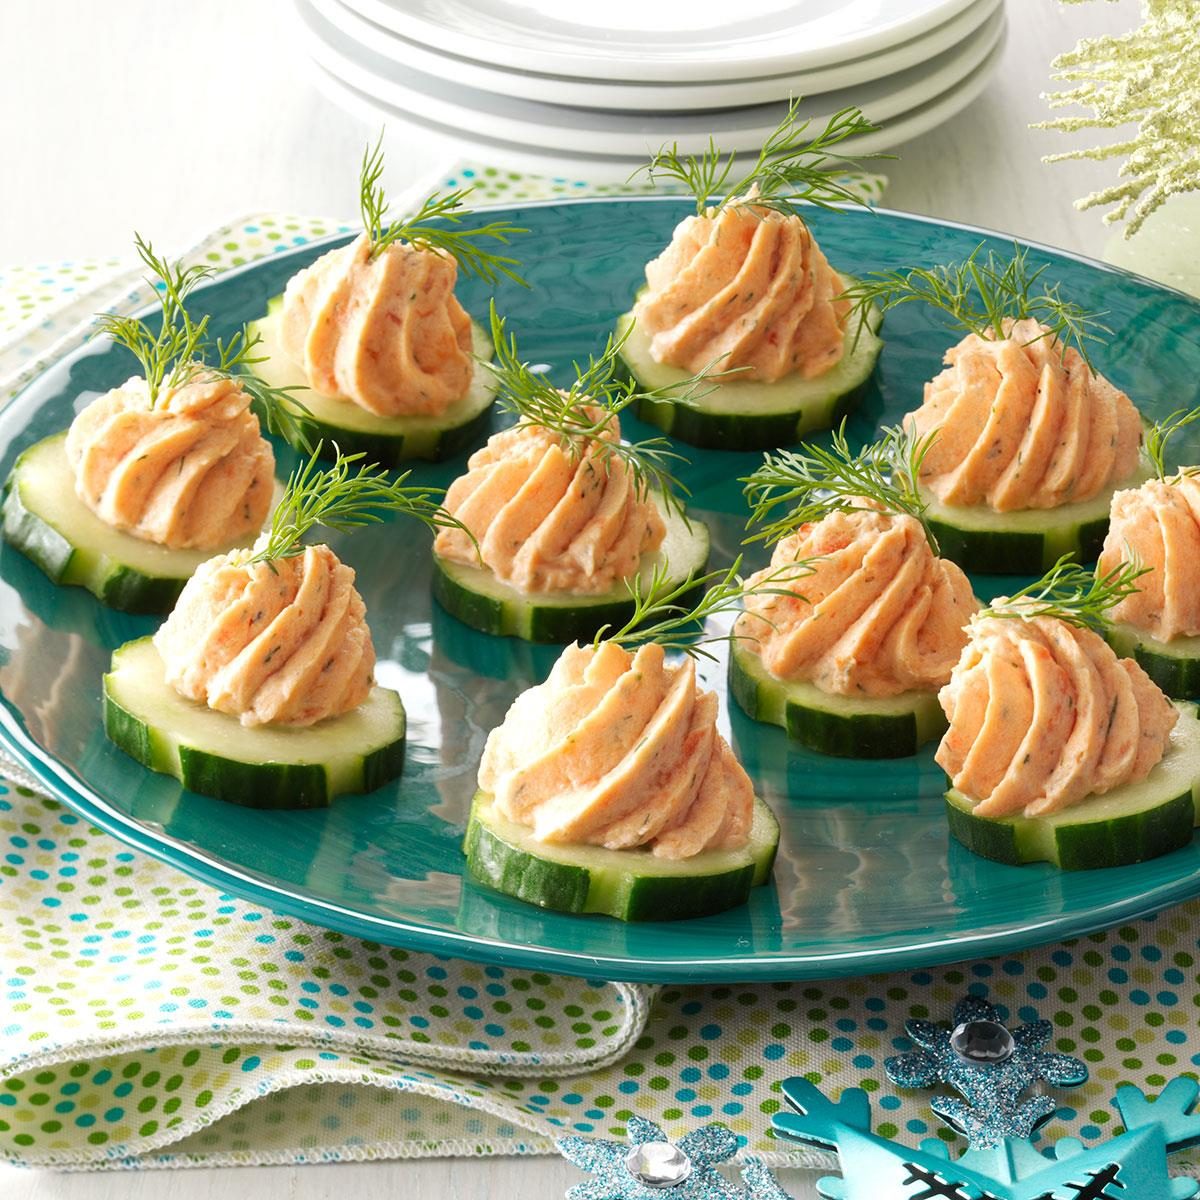 https://www.tasteofhome.com/wp-content/uploads/2018/01/Salmon-Mousse-Canapes_exps65629_THCA2916394C09_28_5b_RMS.jpg